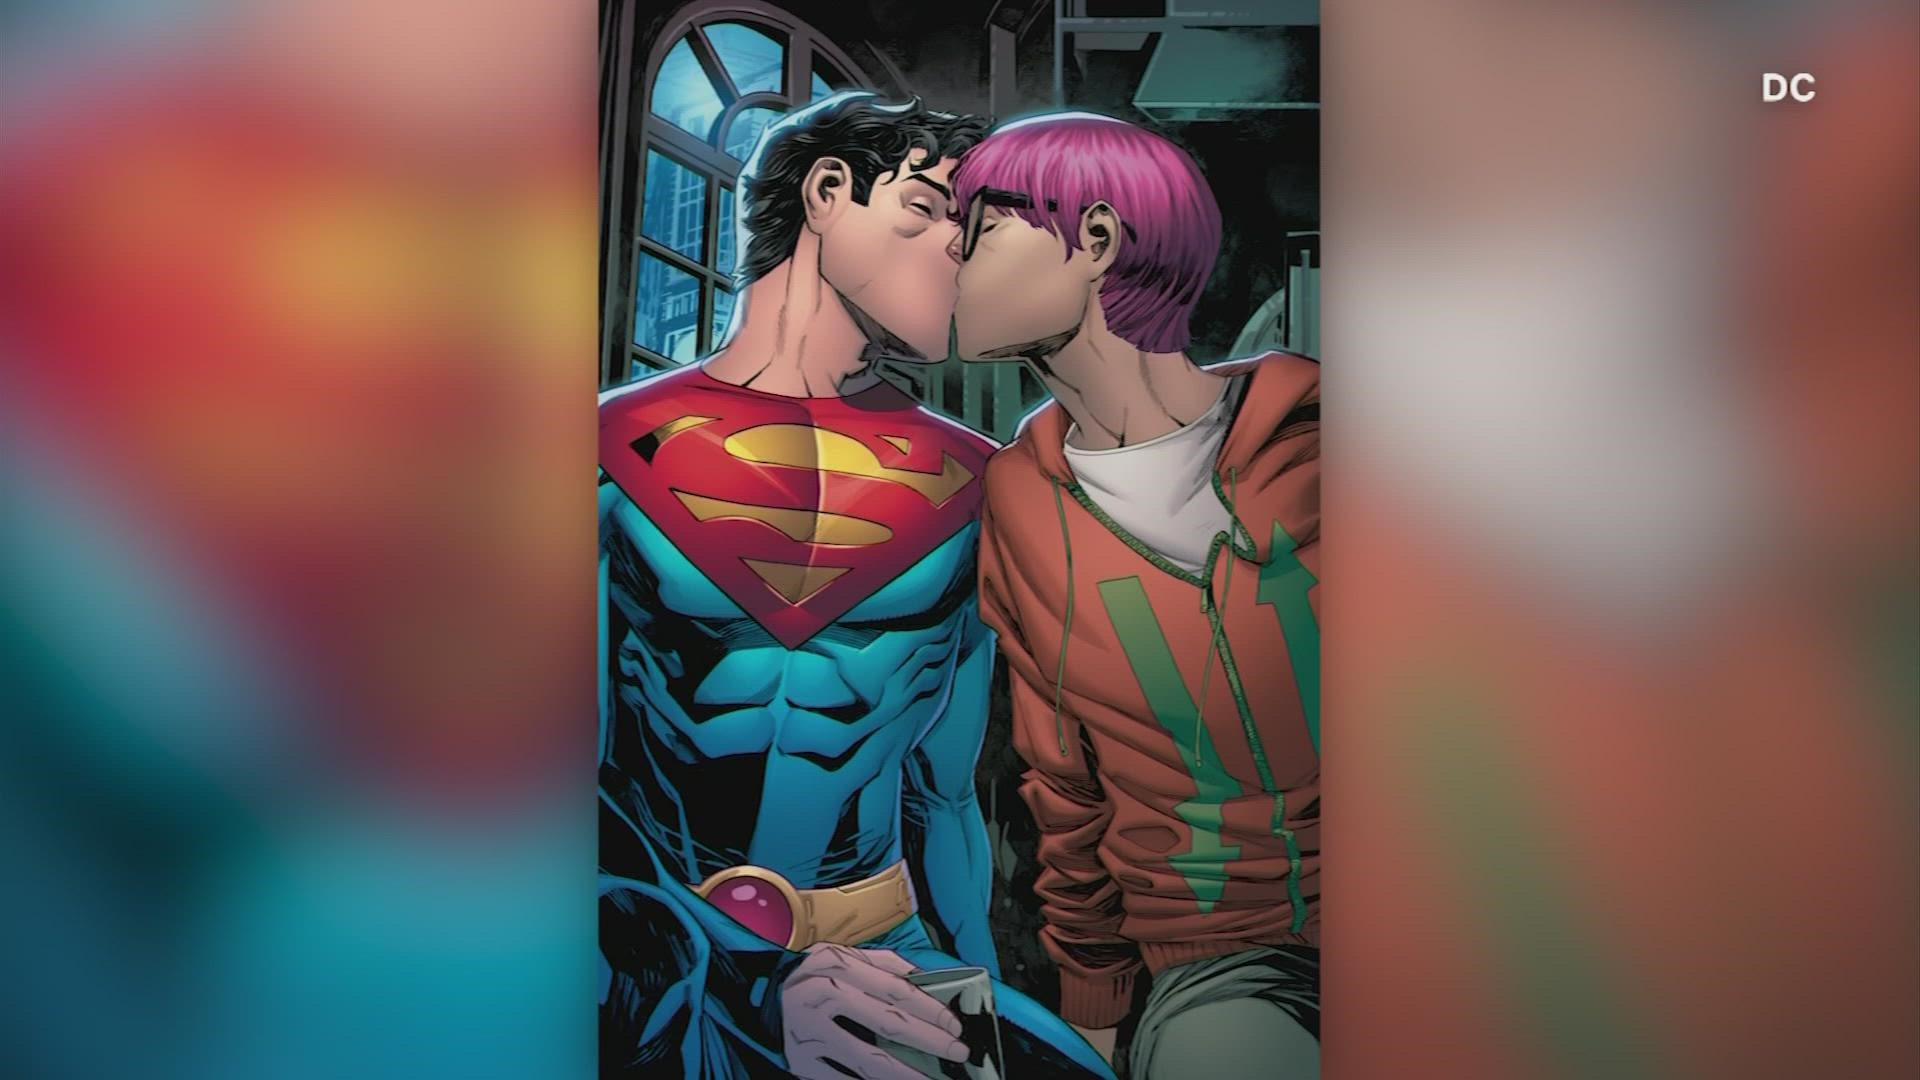 Jon Kent, the son of Clark Kent and Lois Lane, will start a relationship with a journalist named Jay Nakamura.